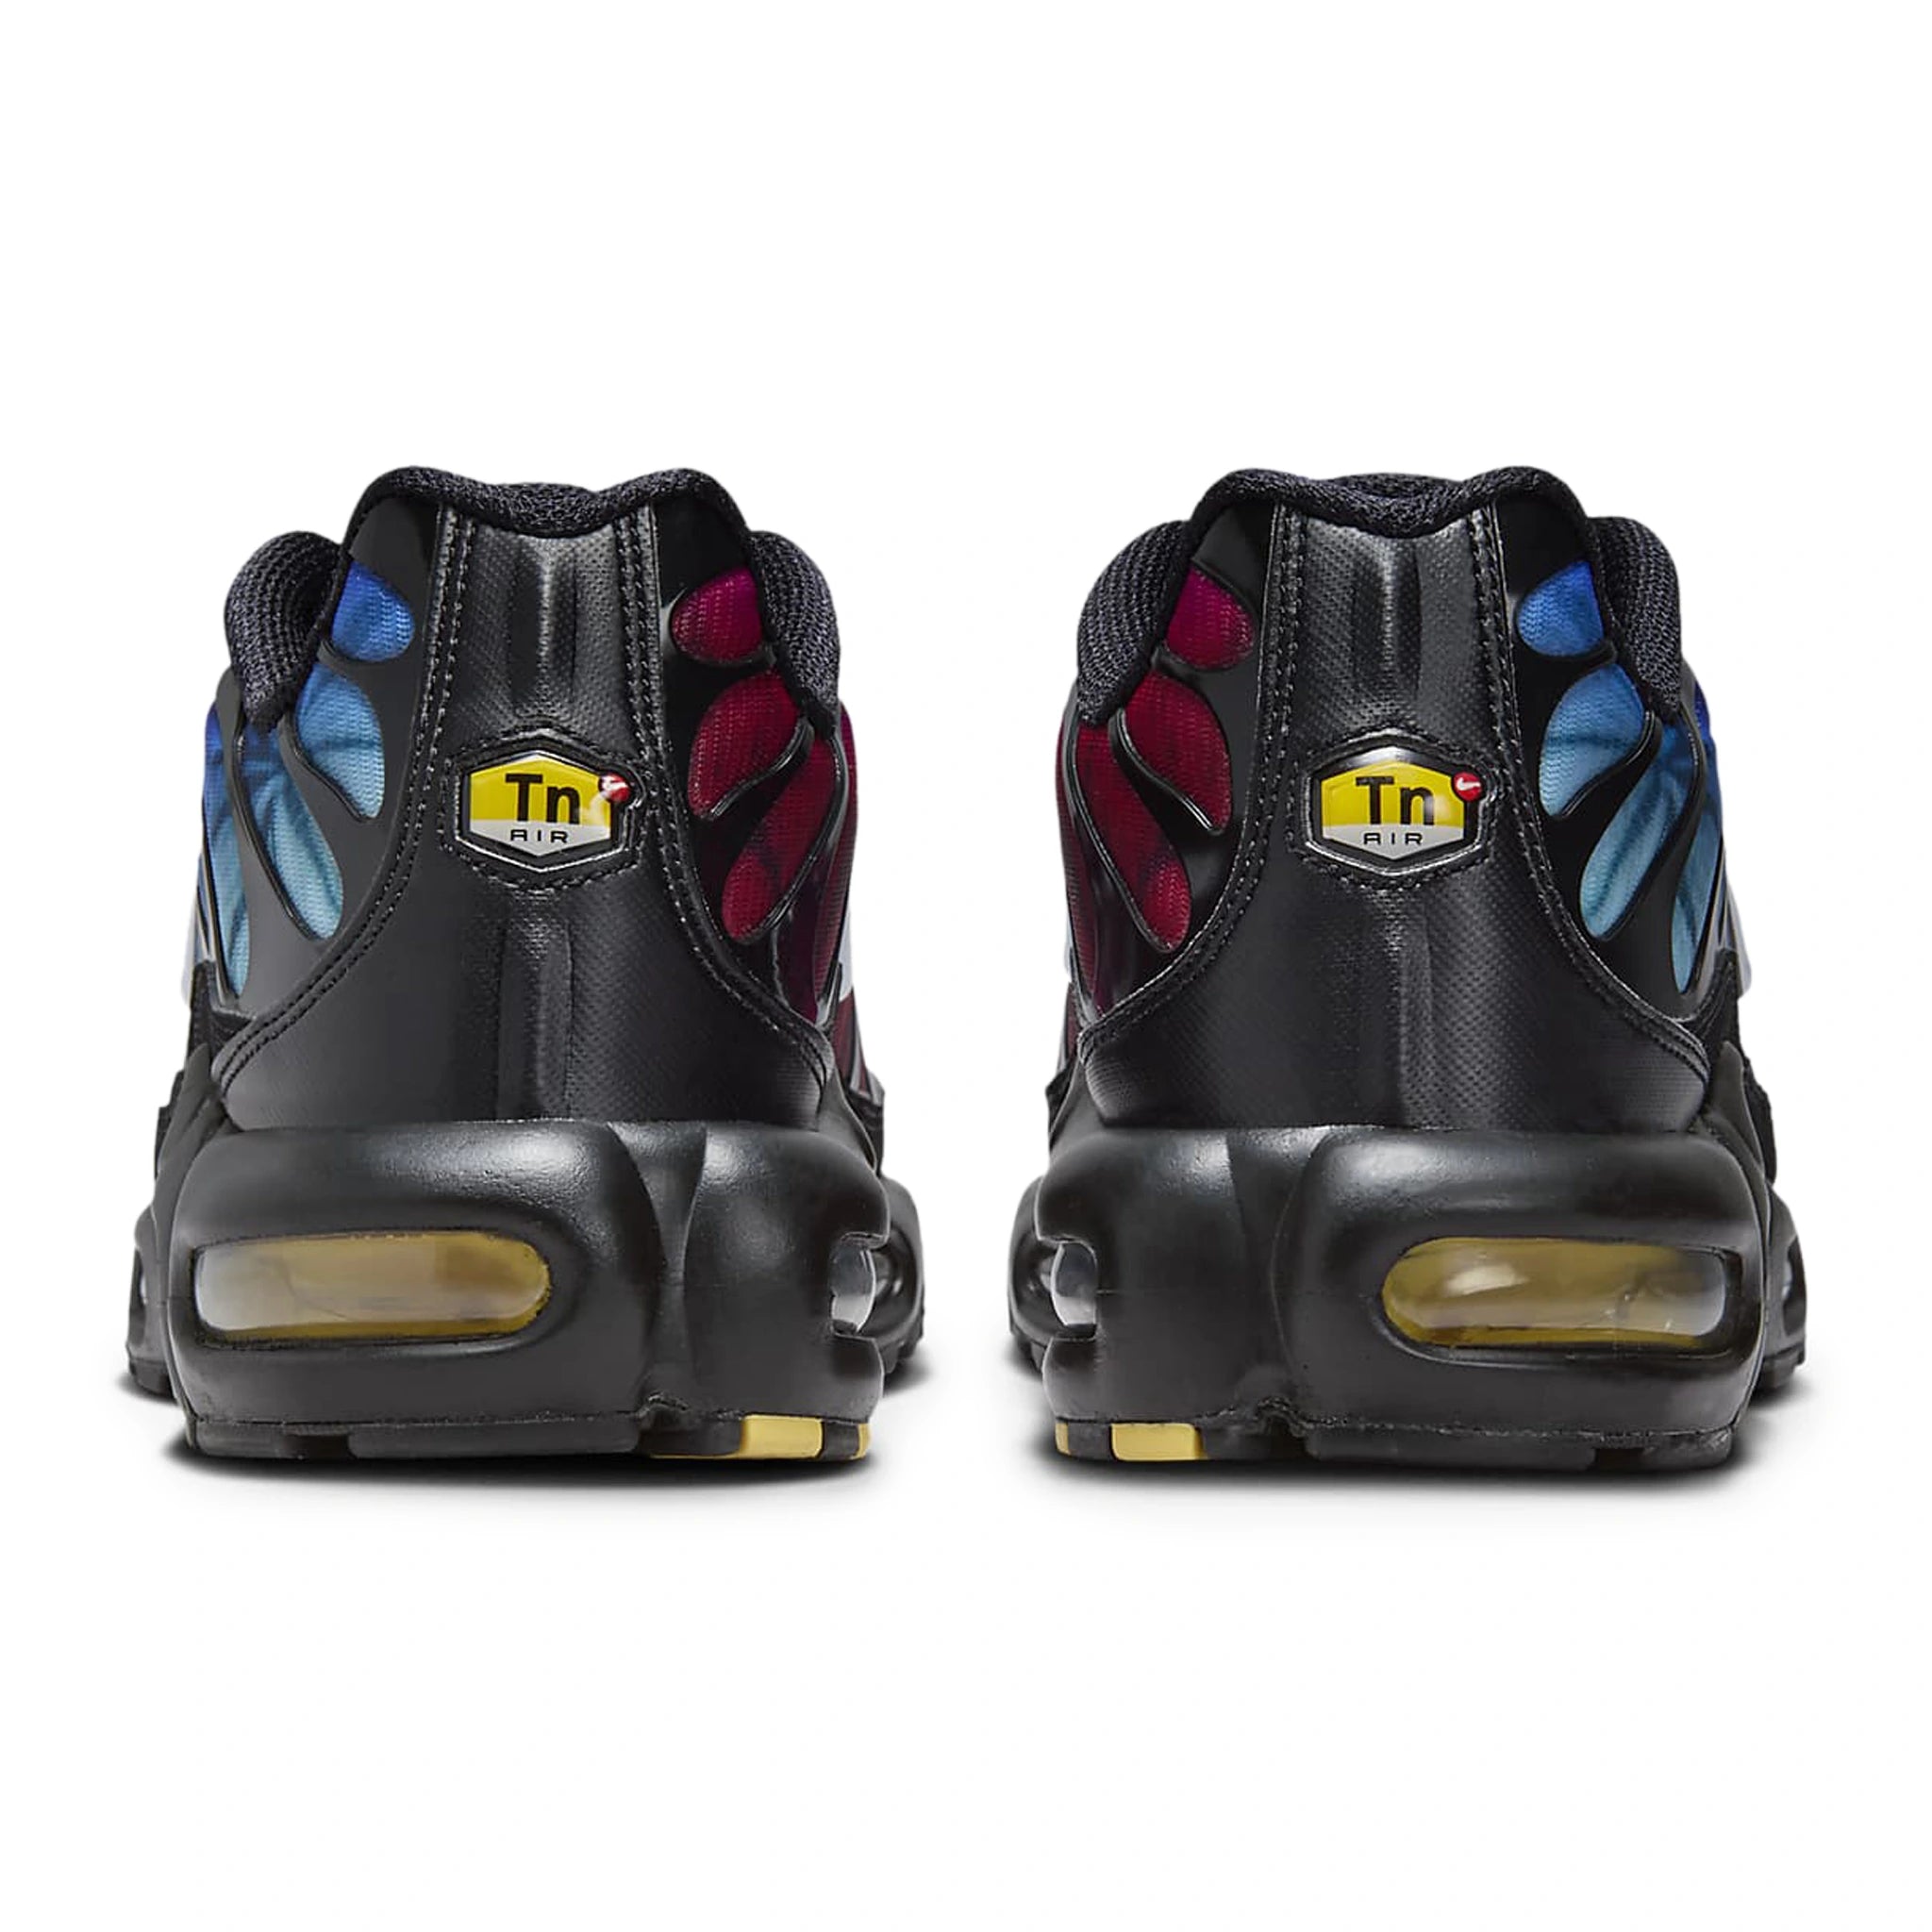 Back side view of Nike TN Air Max Plus 25th Anniversary FV0393-001 front